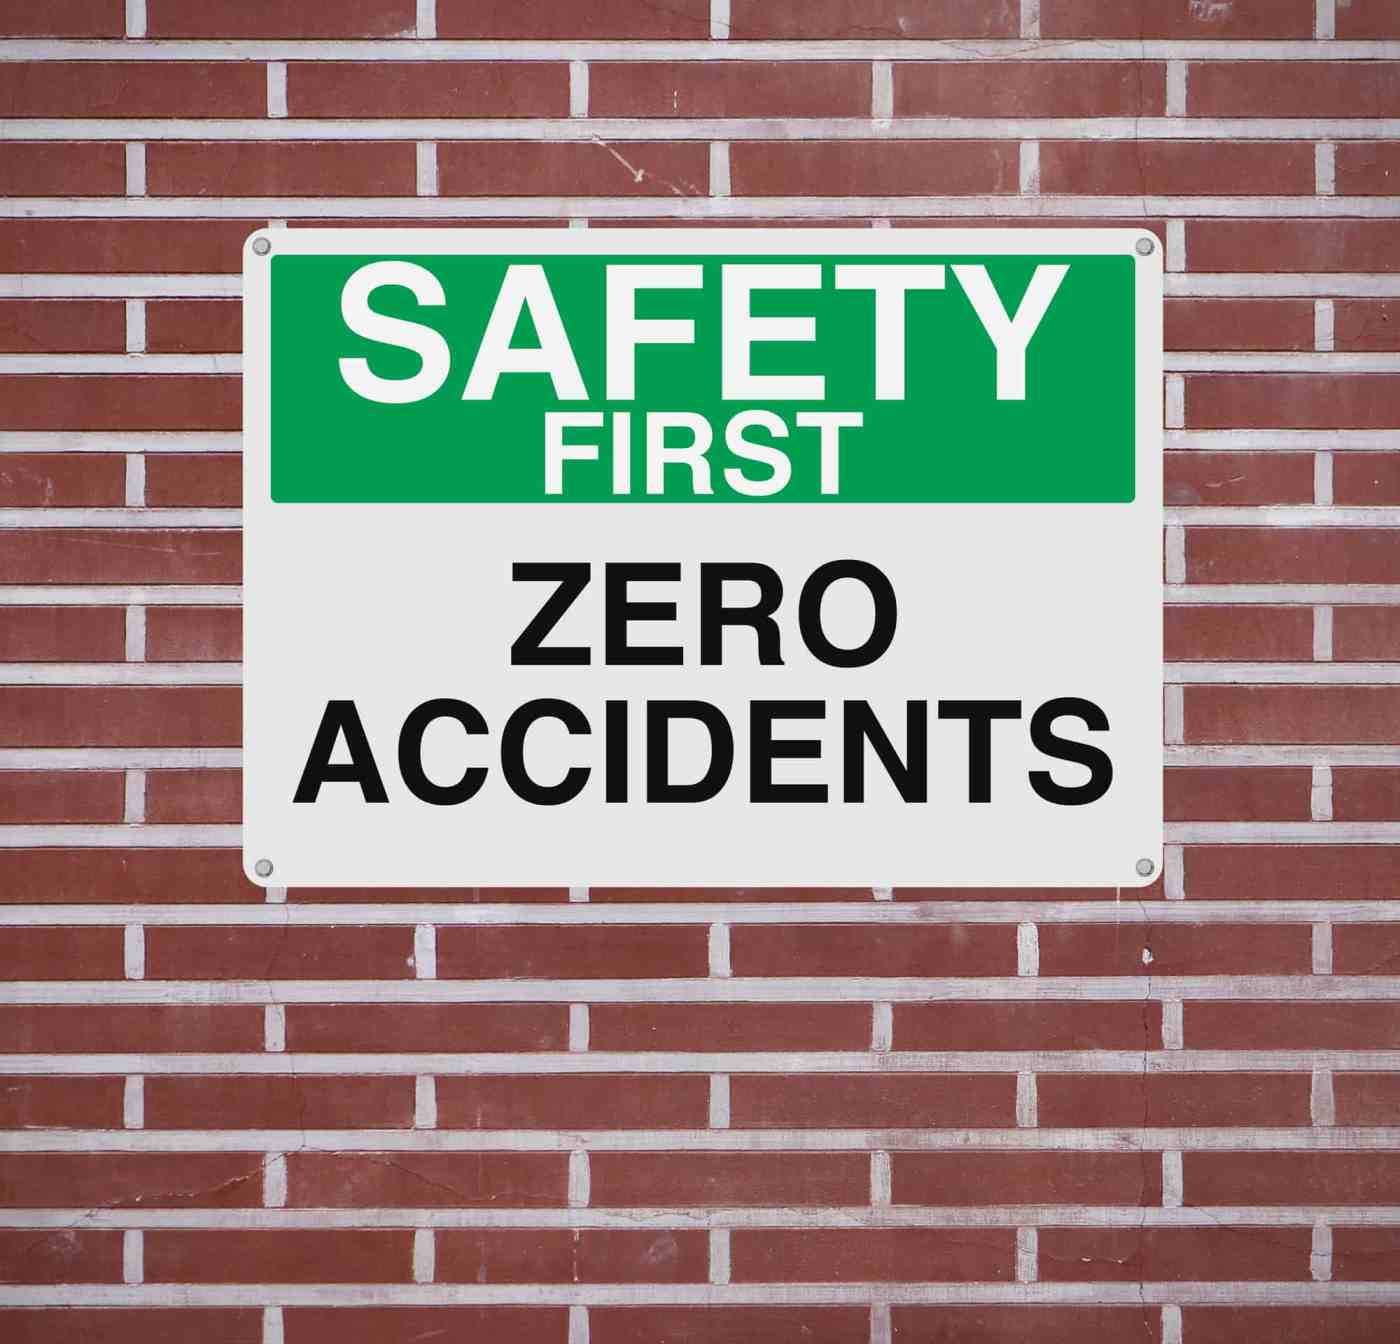 safety practices in the workplace